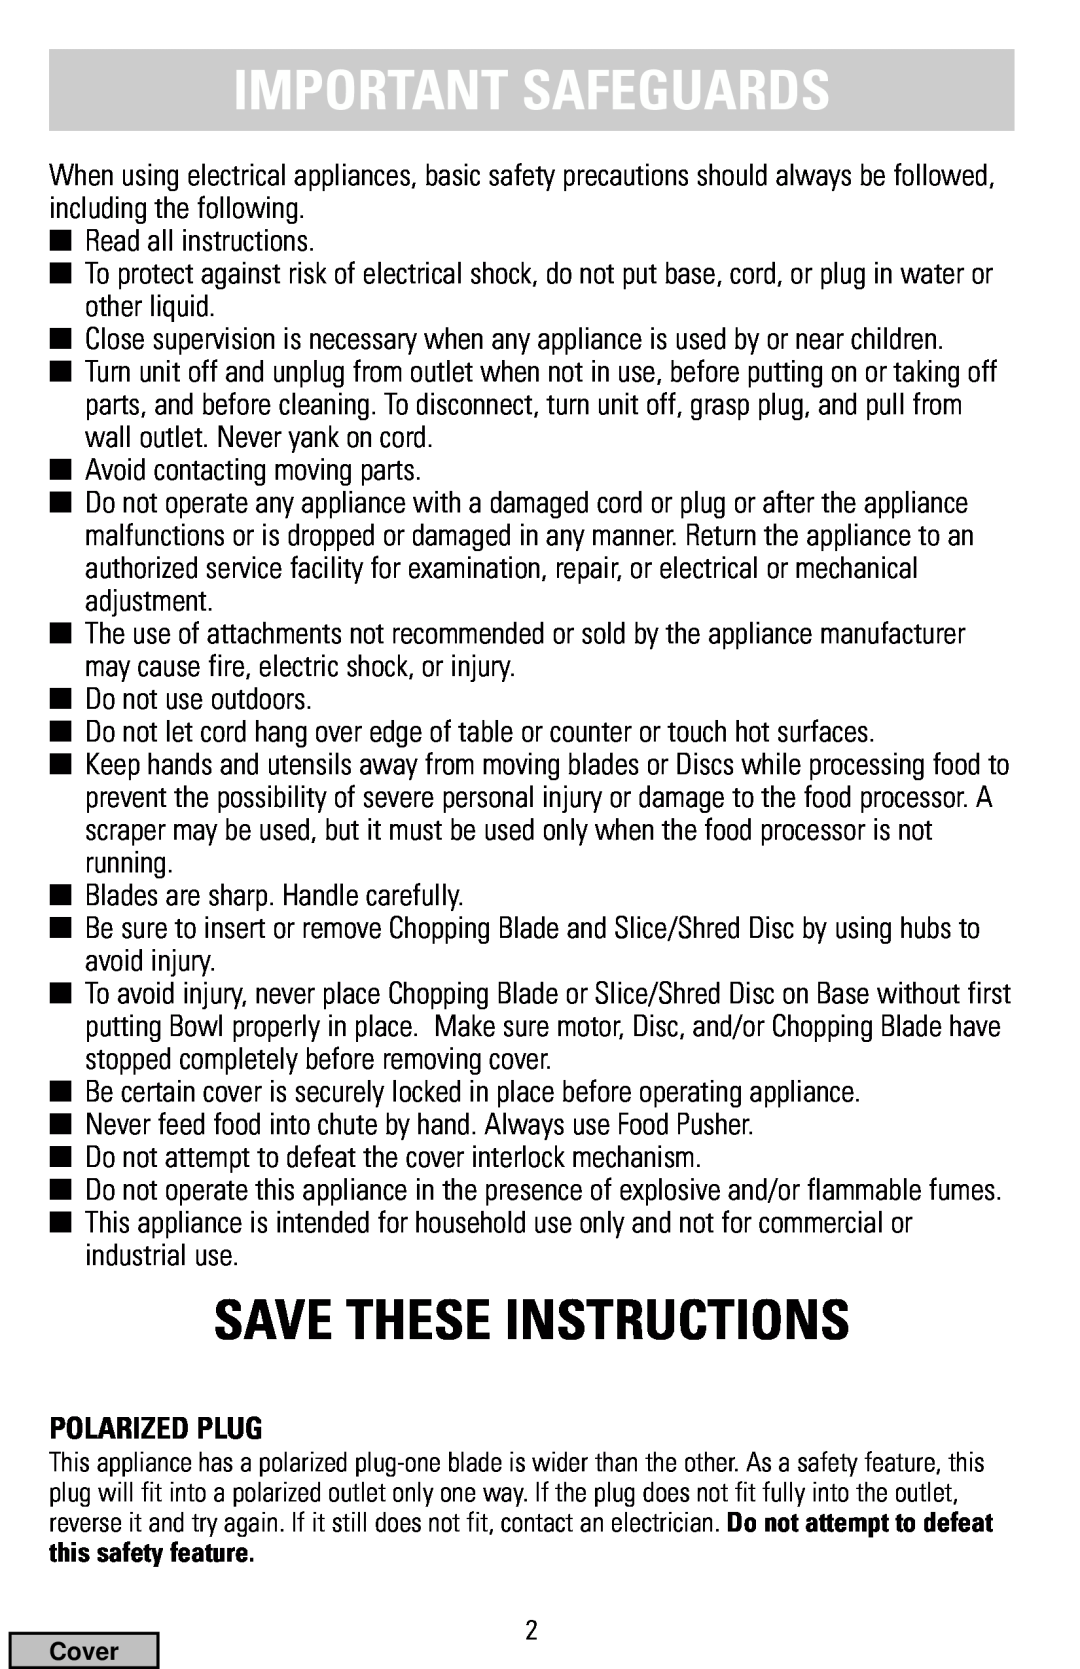 Black & Decker FP1400 Series, FP1300 Series manual Important Safeguards, Save These Instructions, Polarized Plug 